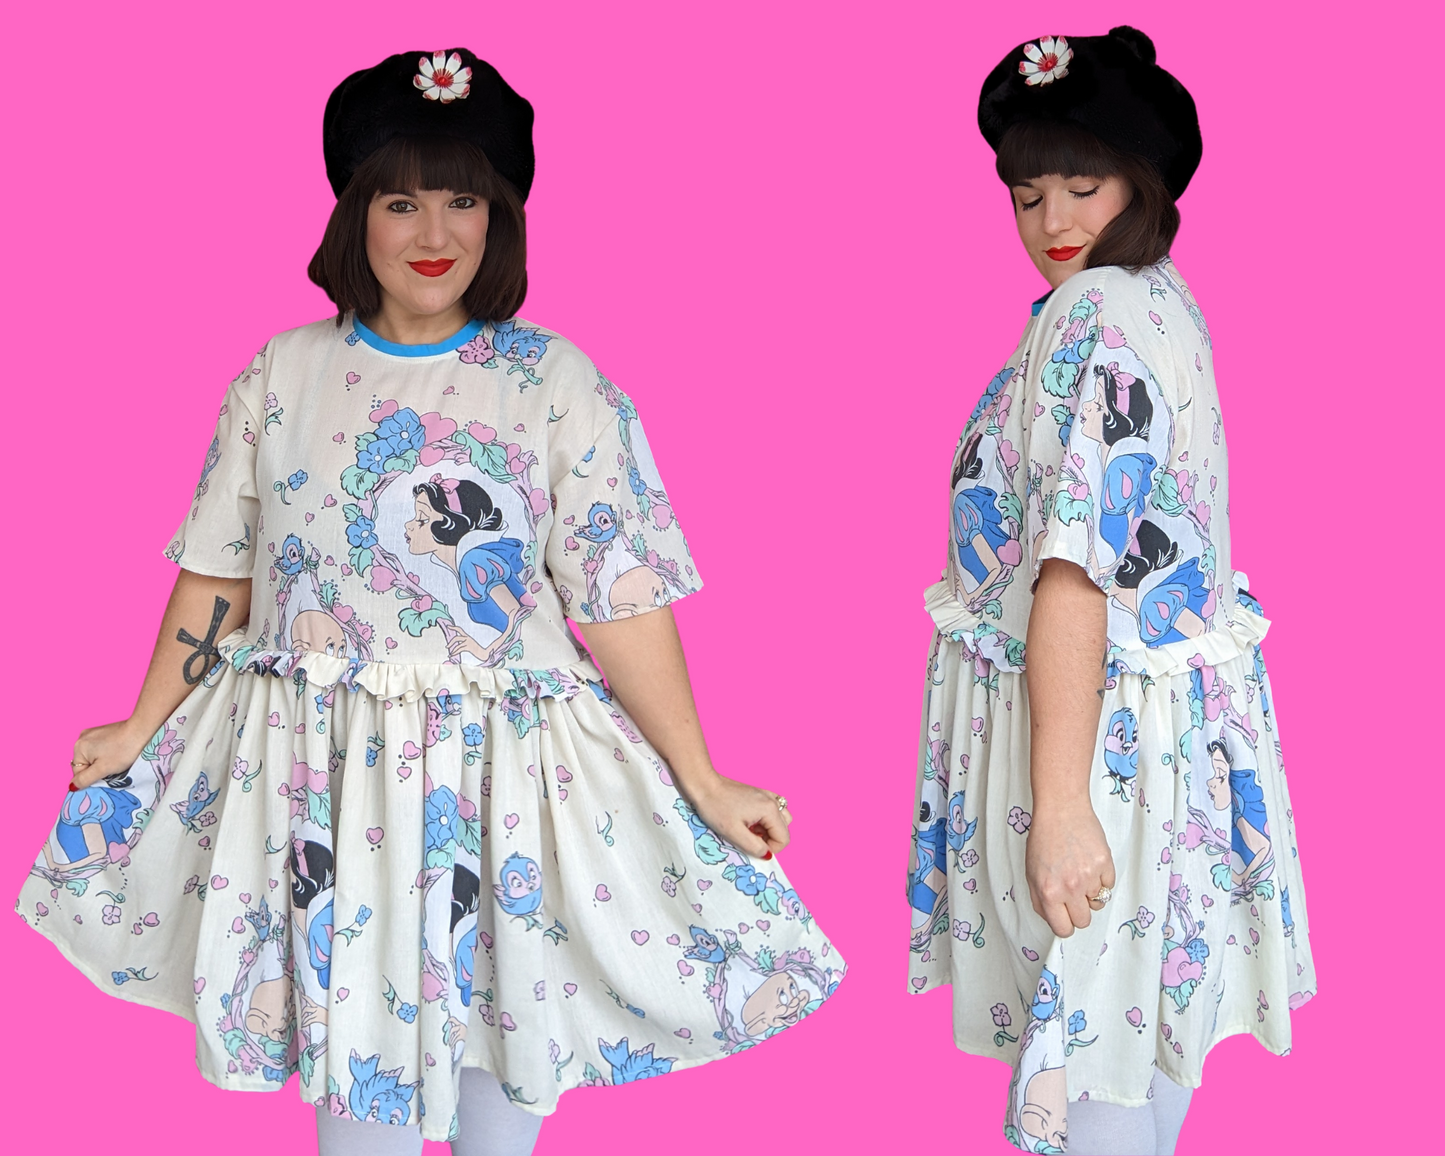 Handmade, Upcycled Disney Snow White and the Seven Dwarves Bedsheet T-Shirt Dress Fits S-M-L-XL